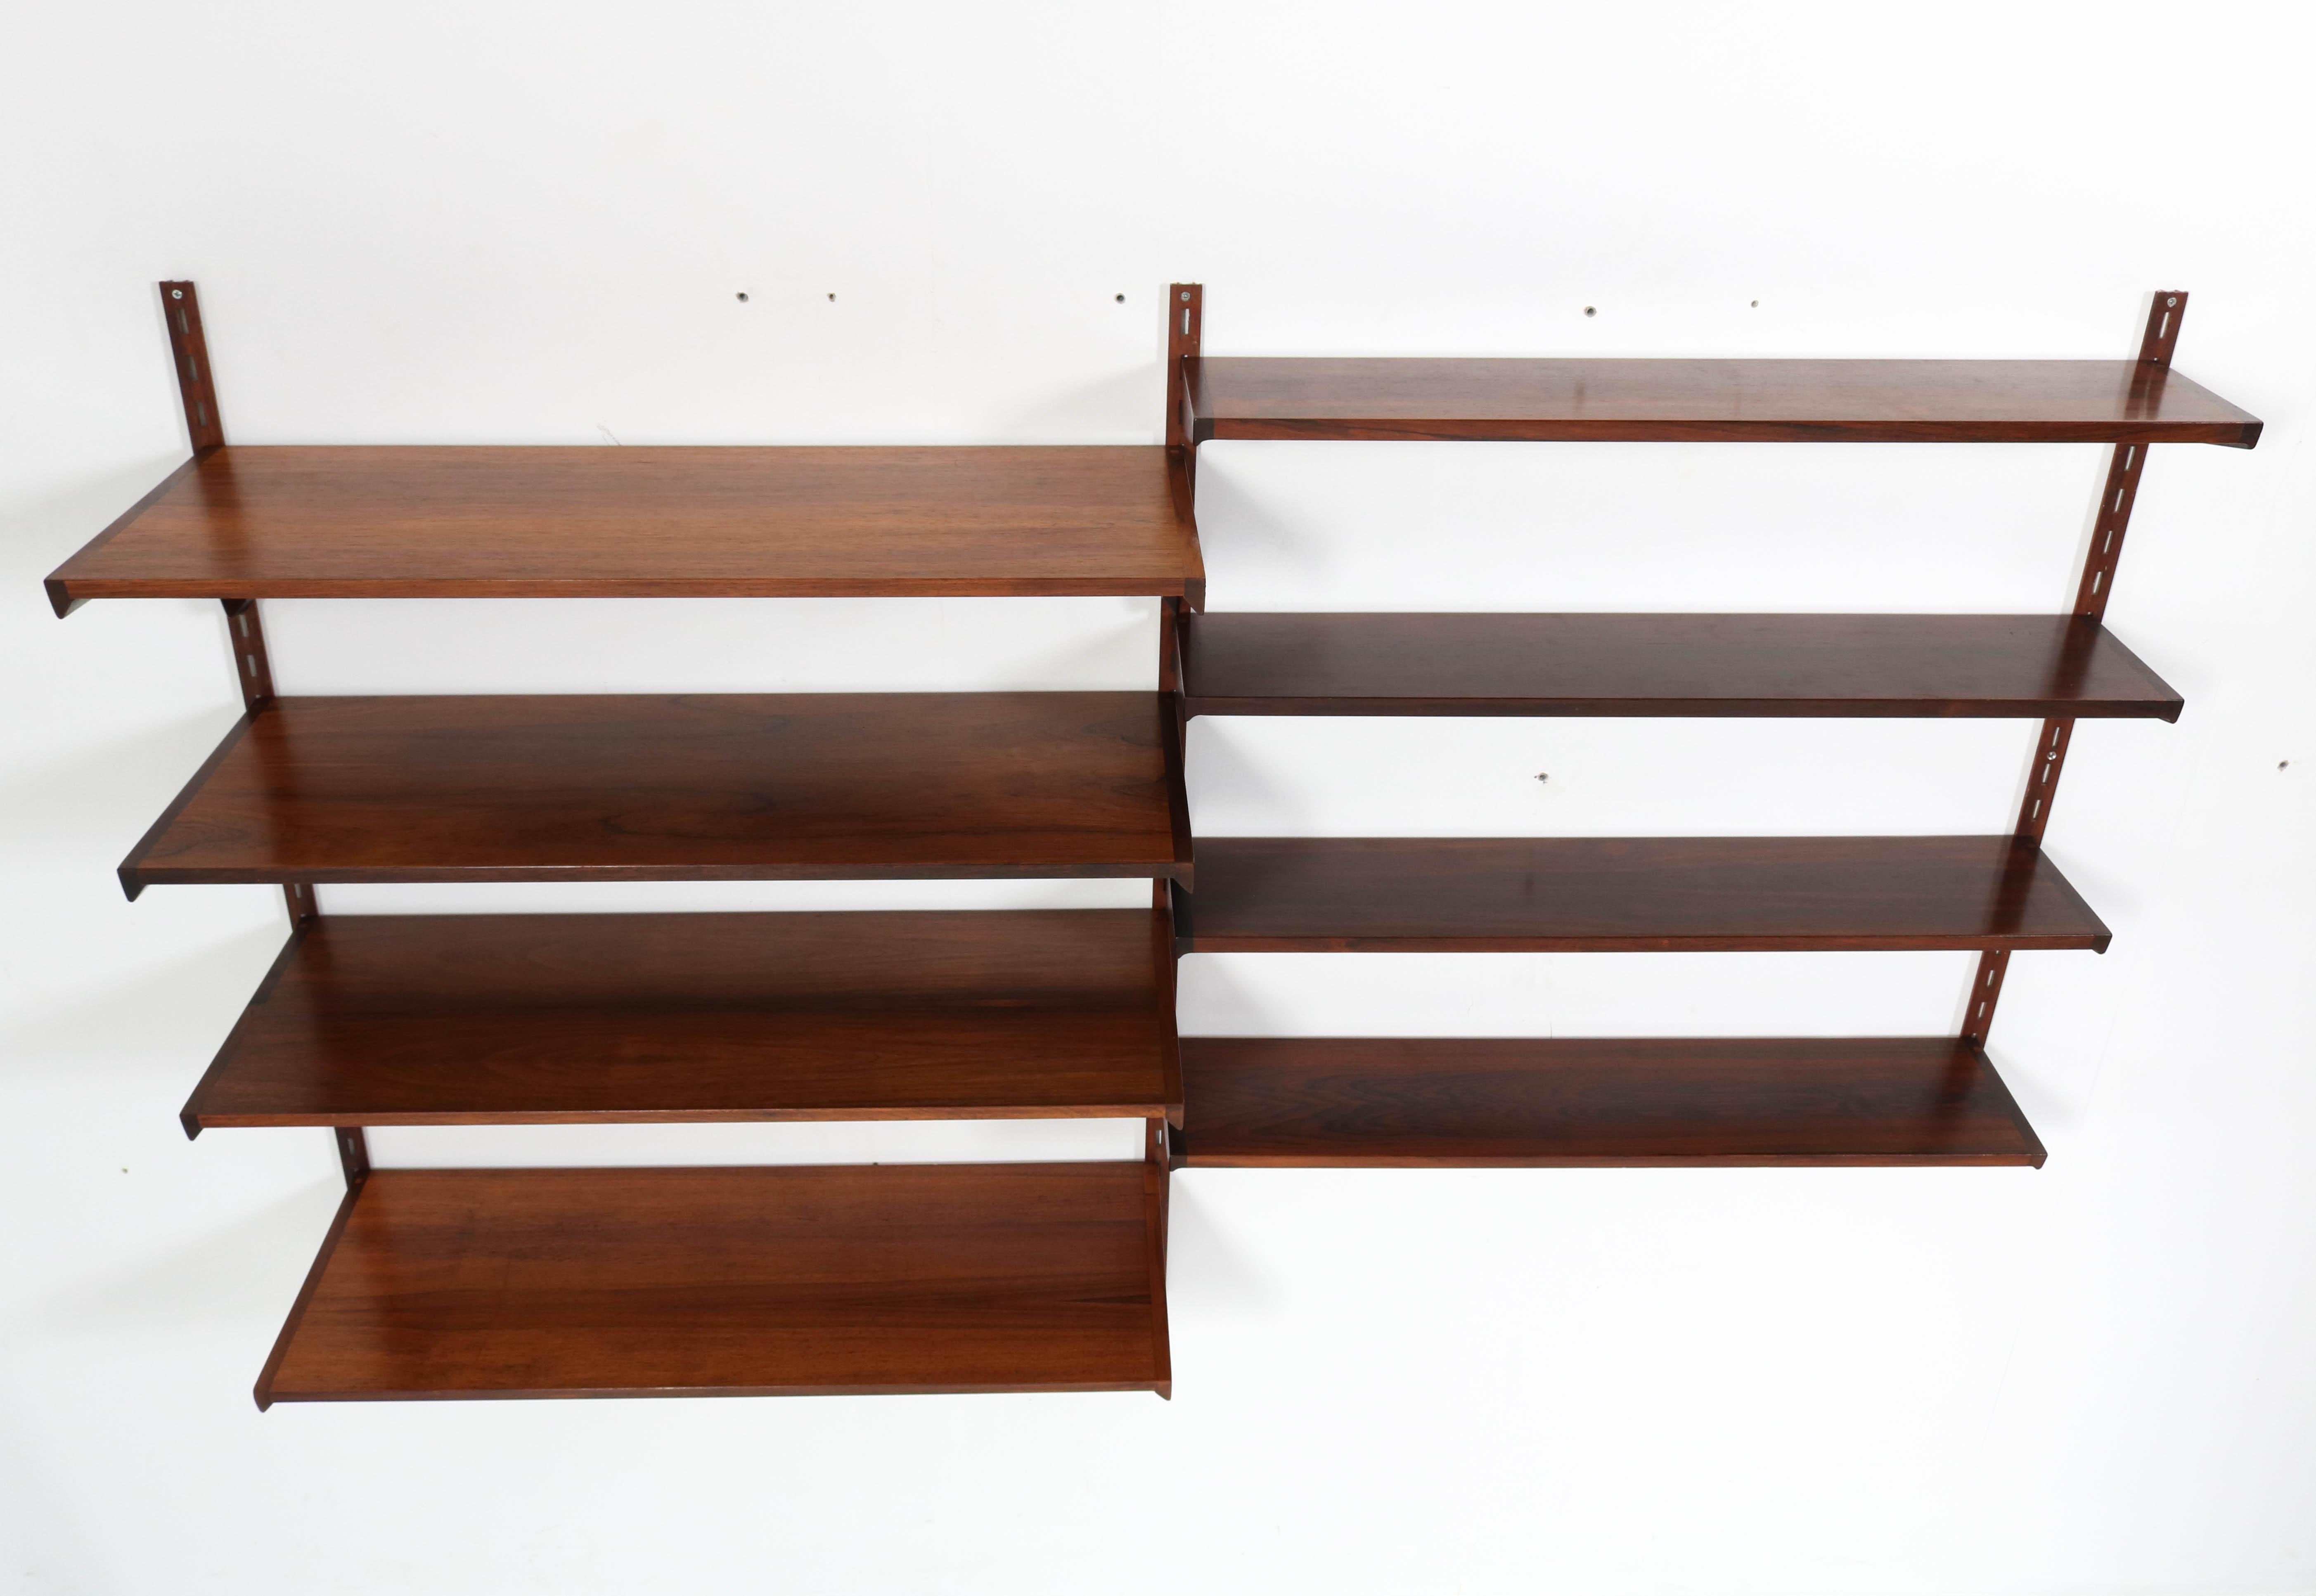 Magnificent Mid-Century Modern reolsystem shelving unit.
Design by Kai Kristiansen for Feldballes Møbelfabrik.
Striking Danish design from 1958.
This wall unit consists of:
Three metal/rosewood uprights.
Four rosewood shelves: 86 cm or 33.86